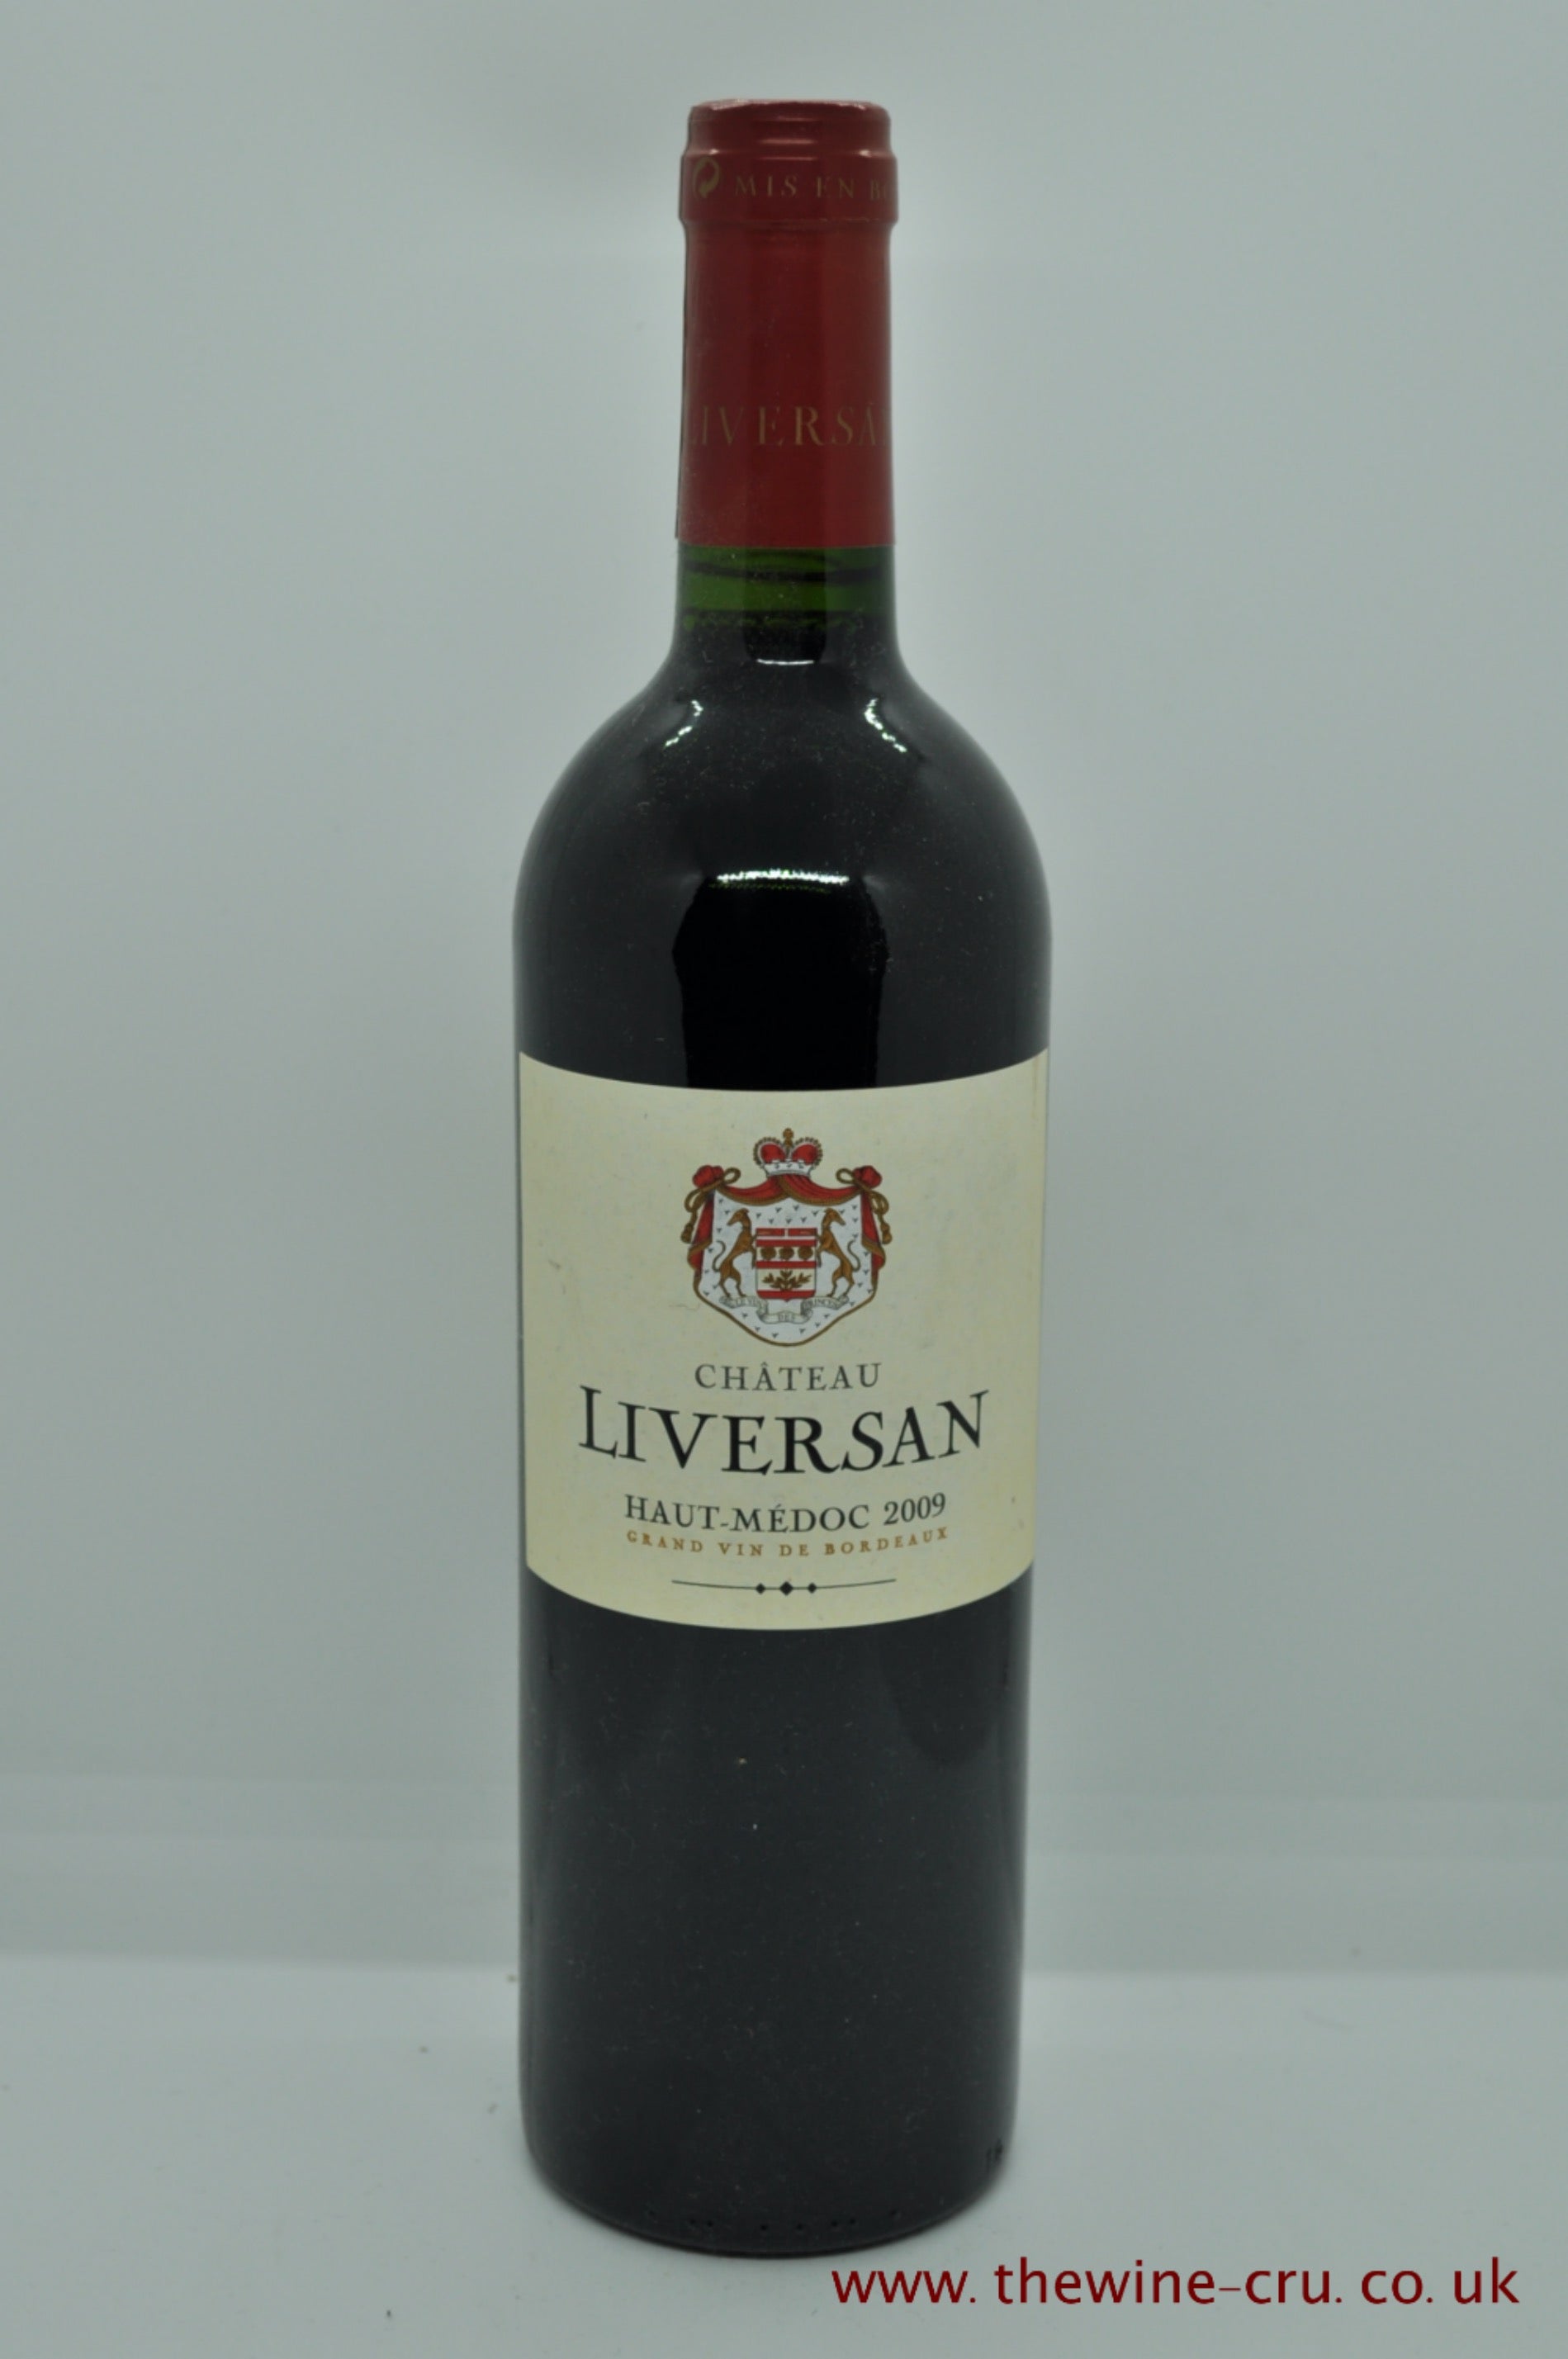 2009 vintage red wine. Chateau Liversan 2009. France Bordeaux. Immediate delivery. Free local delivery. Gift wrapping available.